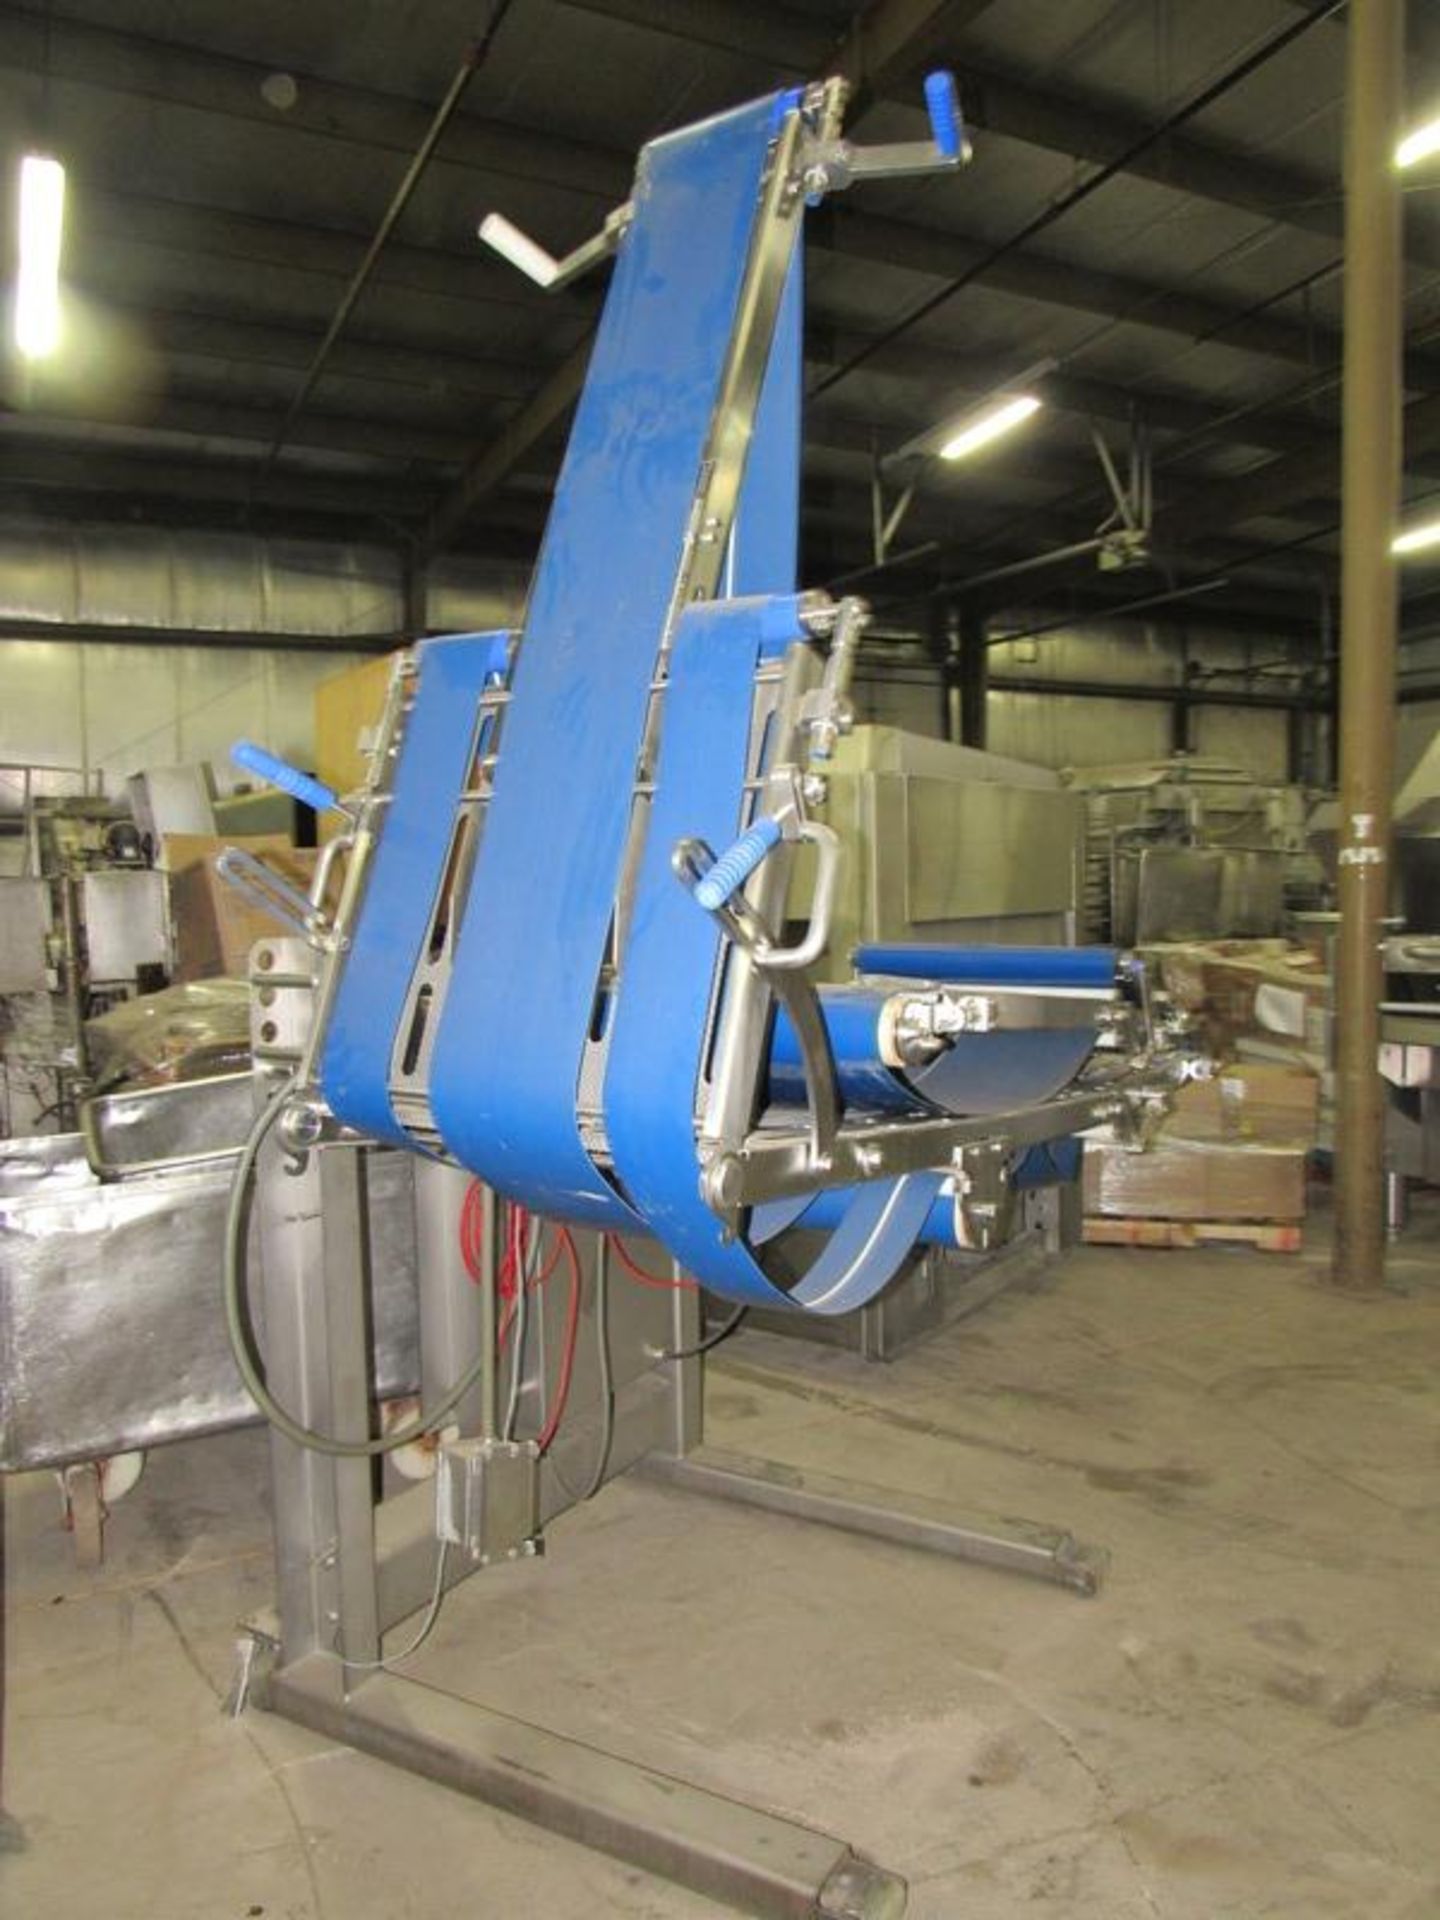 Formax Mdl. Power Max 4000 High Speed Slicer, 4 lane, 40" long product holders with grippers, 8" - Image 16 of 17